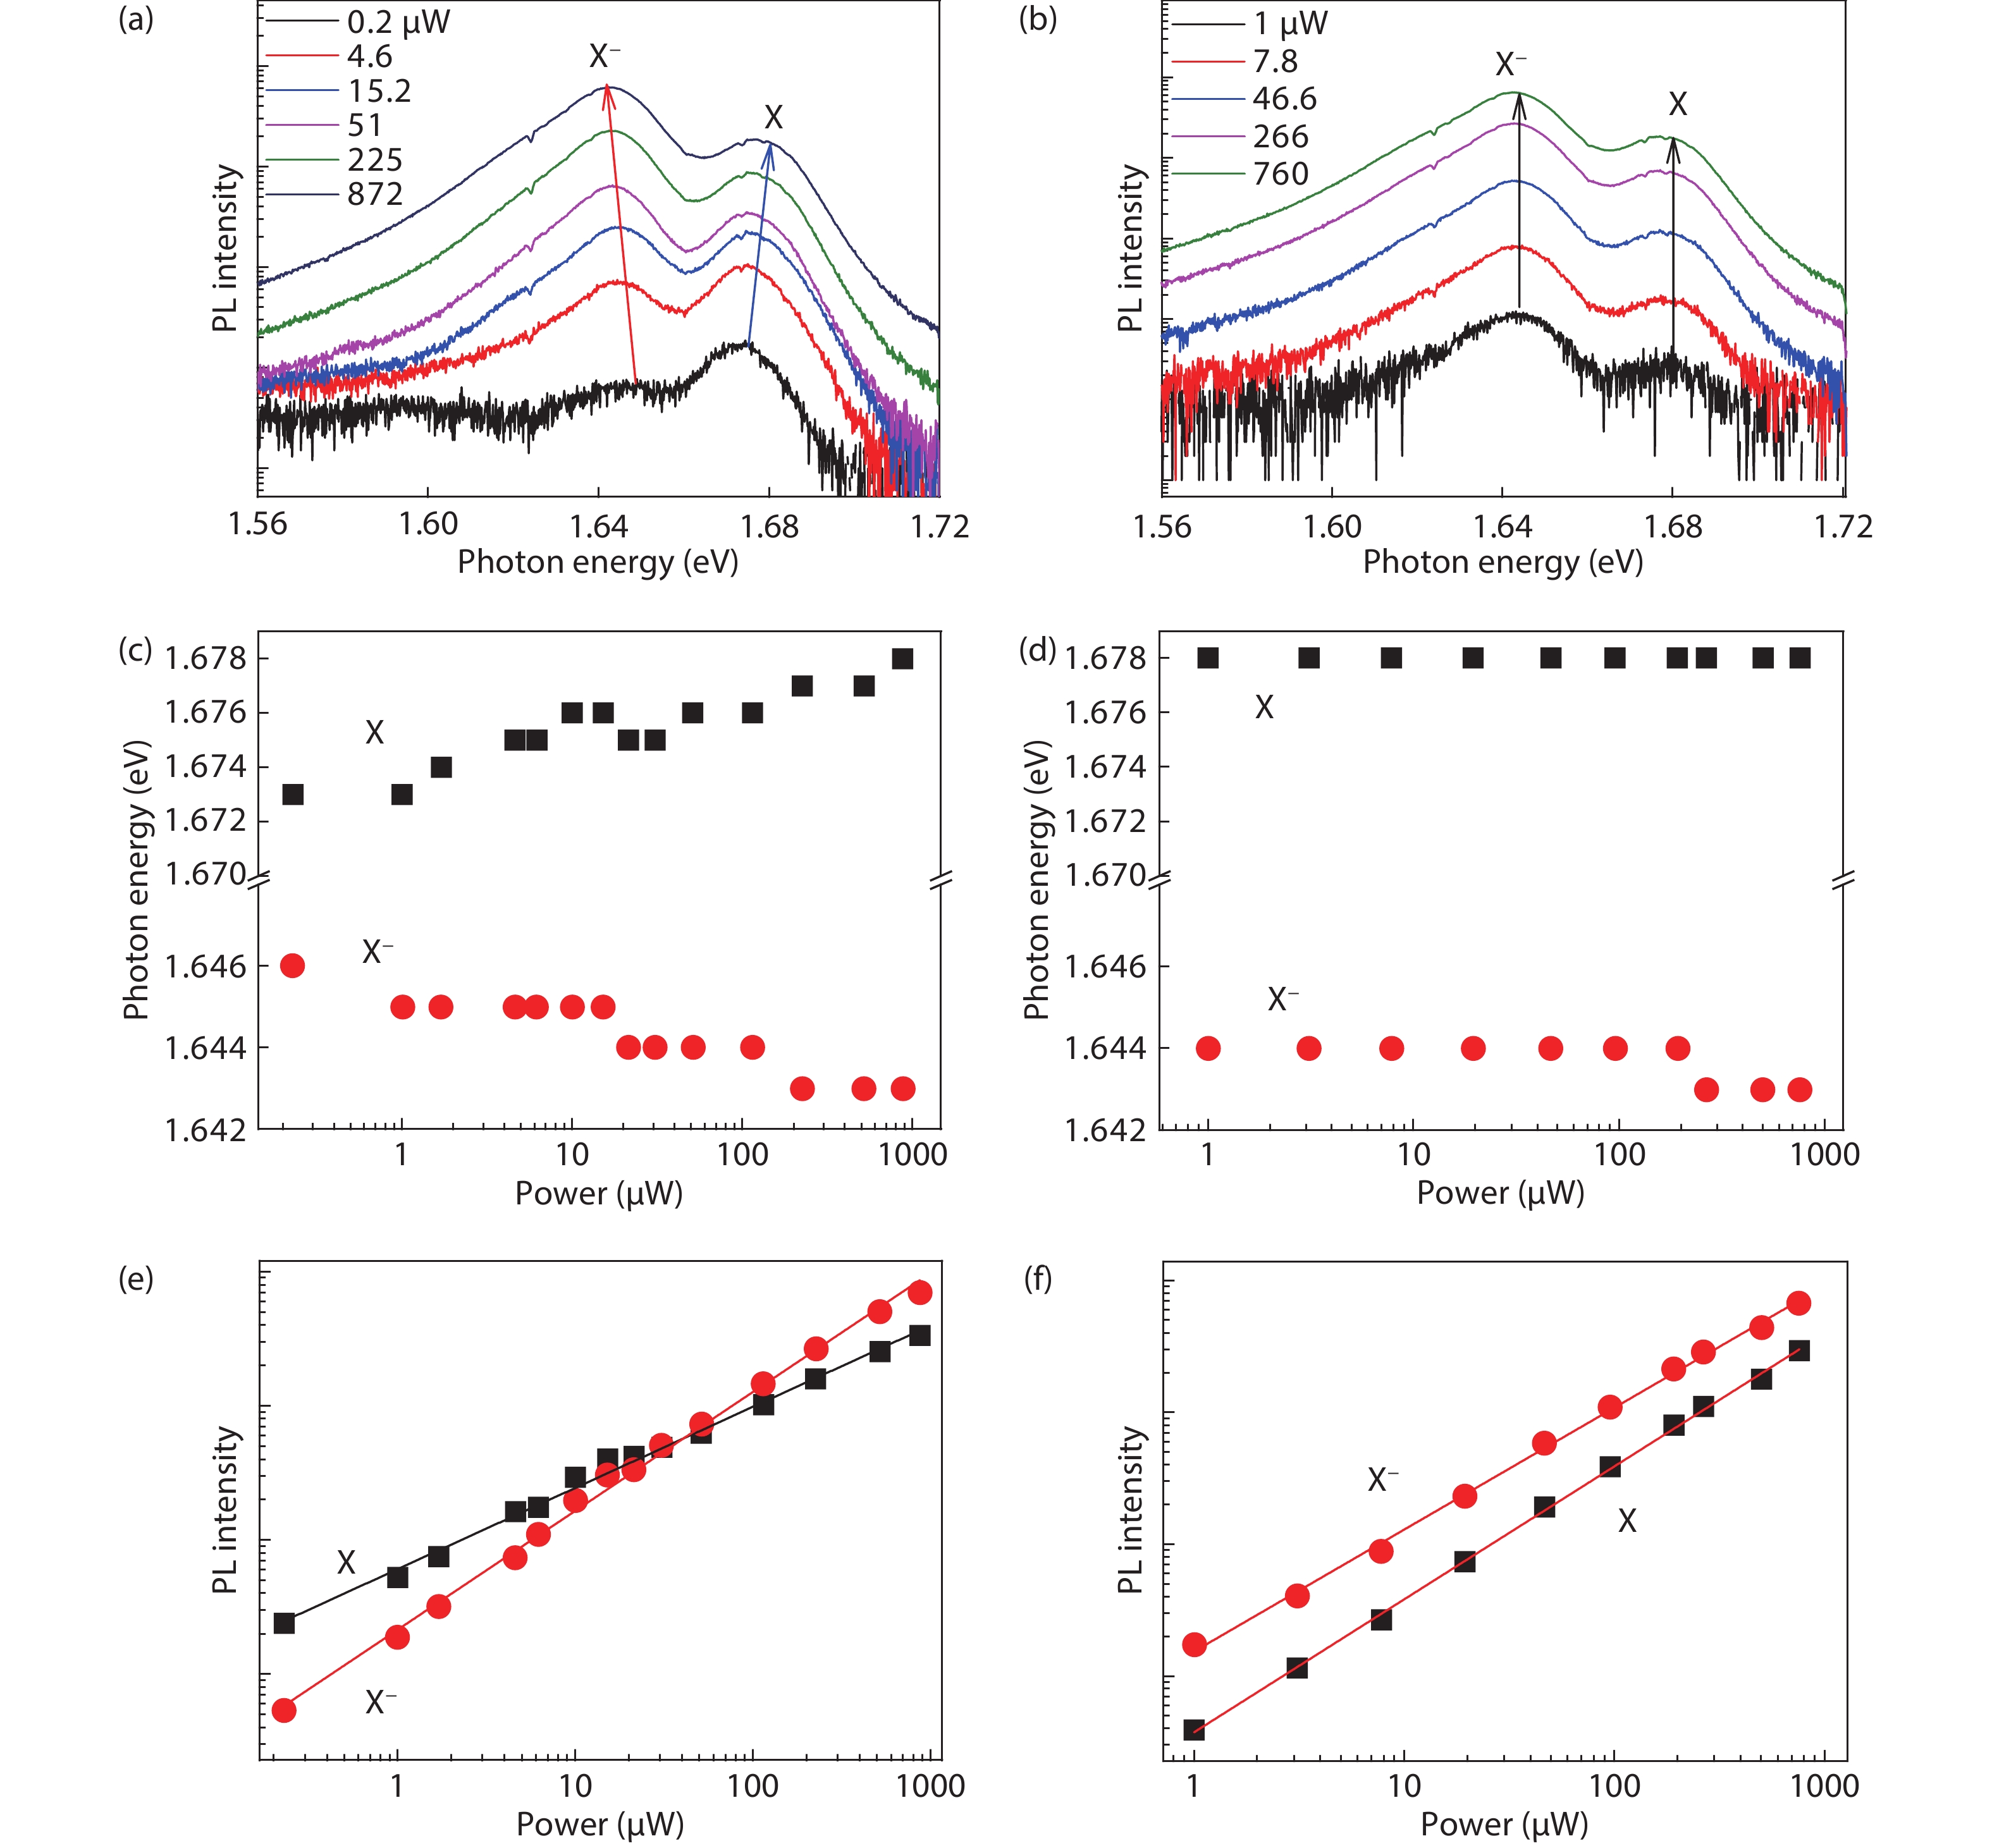 (Color online) (a) PL spectra of the transferred monolayer MoSe2 for the first-round measurements with increasing excitation power from 0.2 to 872 μW at 6 K. The corresponding X and X– PL peak energies and intensities are summarized in (c) and (e), respectively. (b) PL spectra for the second-round measurements with increasing excitation power from 1 to 760 μW at 6 K after the excitation power up to 872 μW. The corresponding X and X– PL peak energies and intensities are summarized in (d) and (f), respectively.